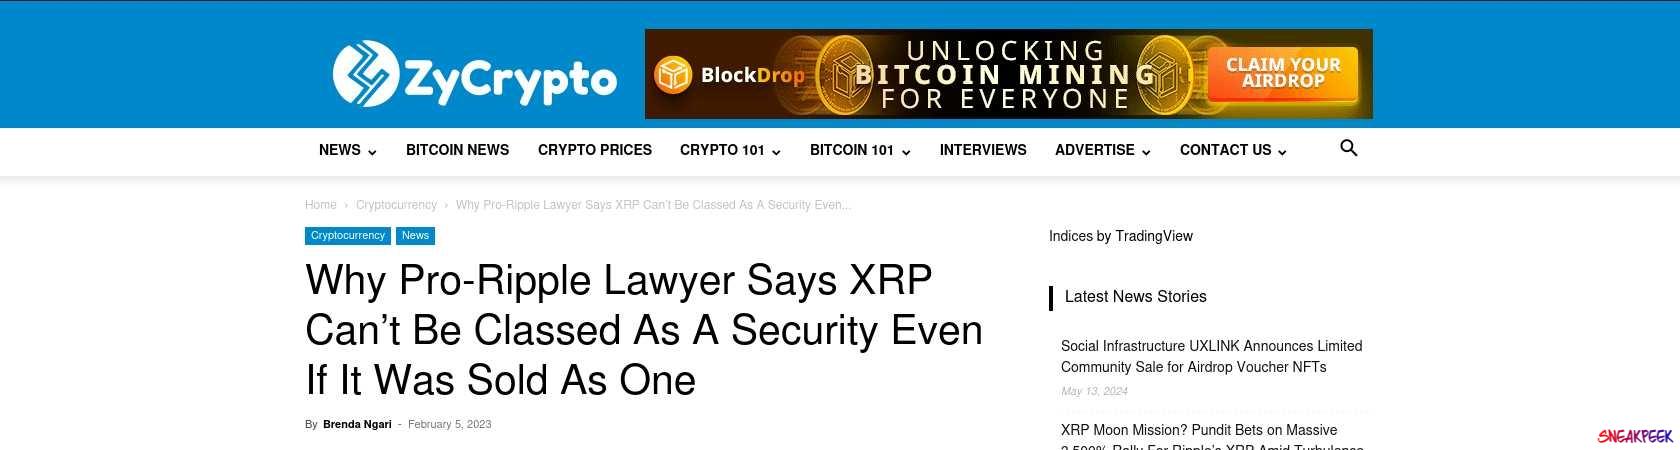 Read the full Article:  ⭲ Why Pro-Ripple Lawyer Says XRP Can’t Be Classed As A Security Even If It Was Sold As One